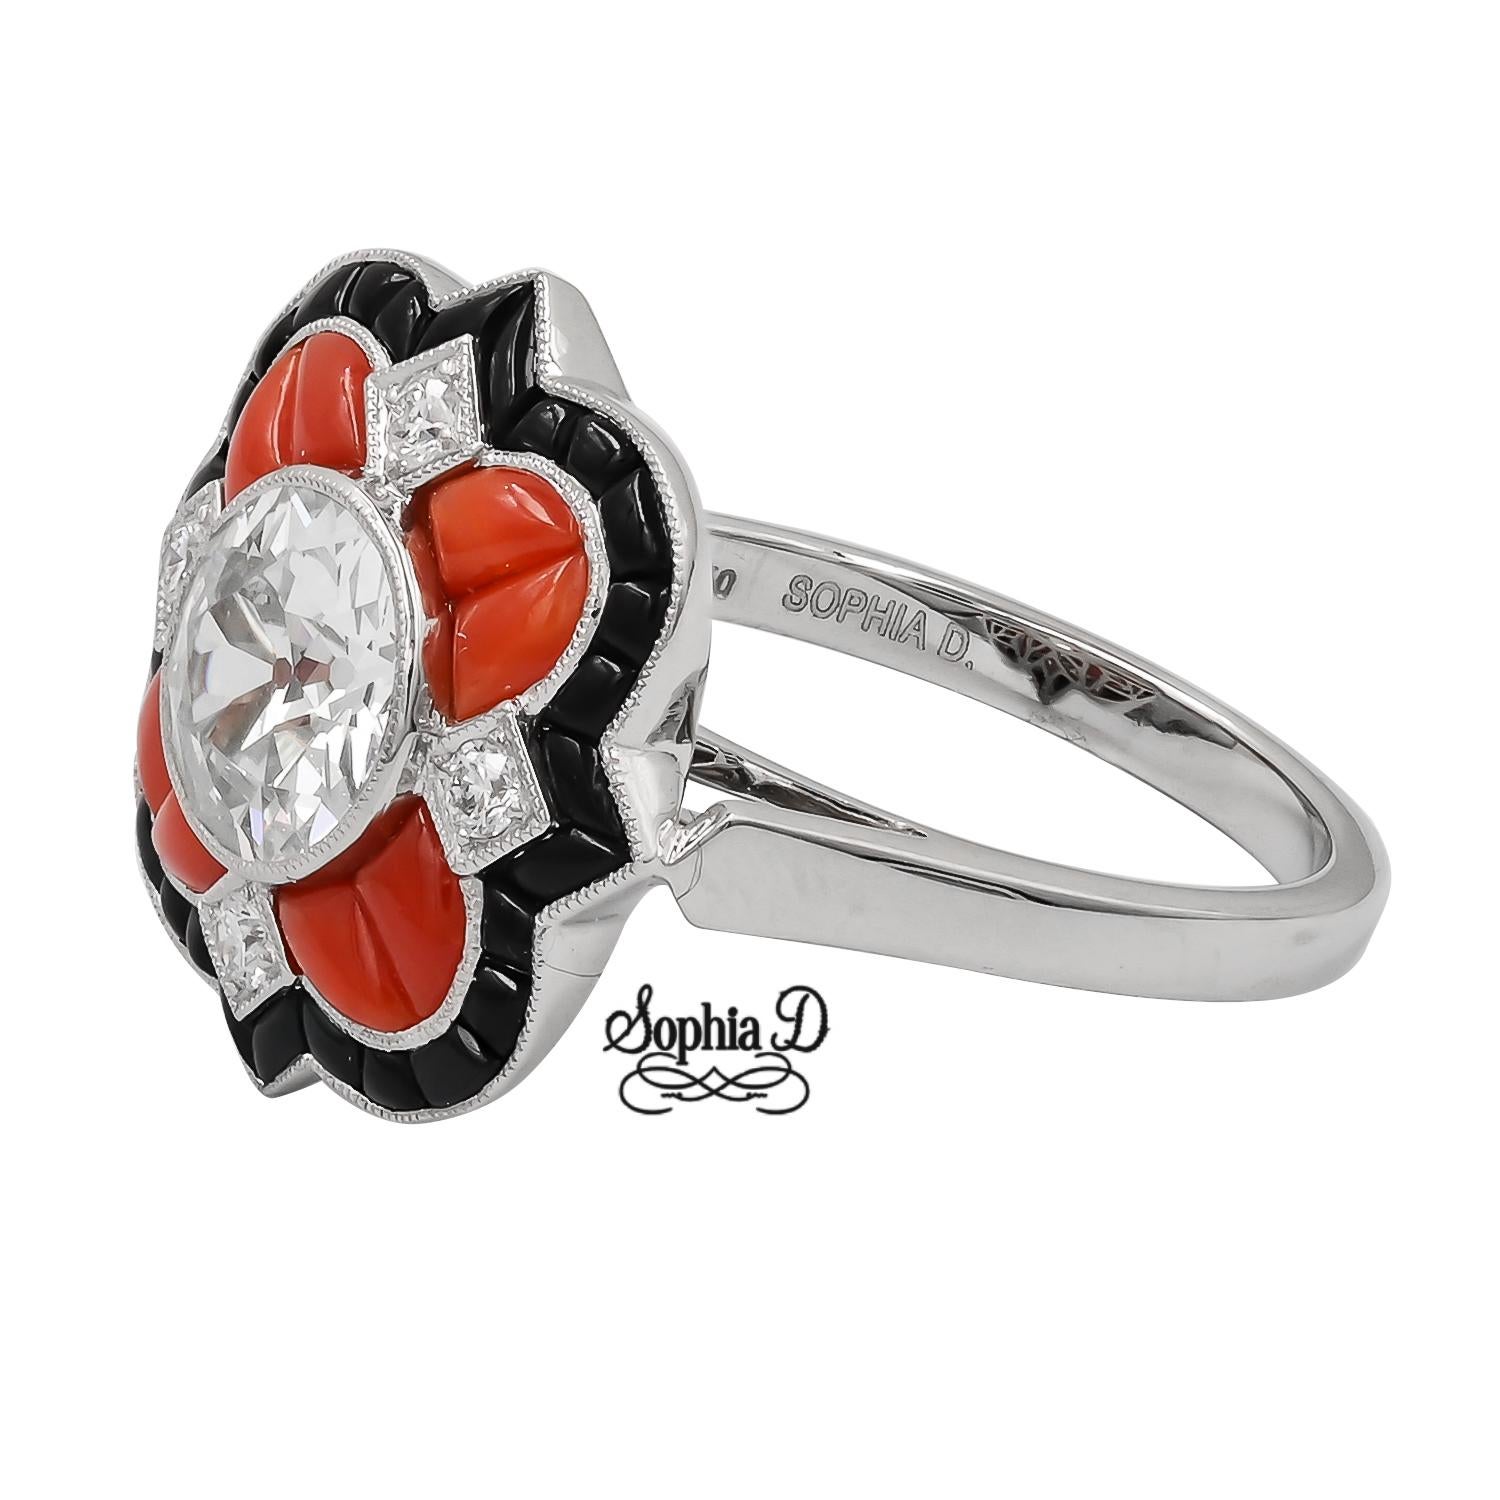 Round Cut Sophia D. 1.23 Carat Art Deco Ring with Coral and Onyx For Sale